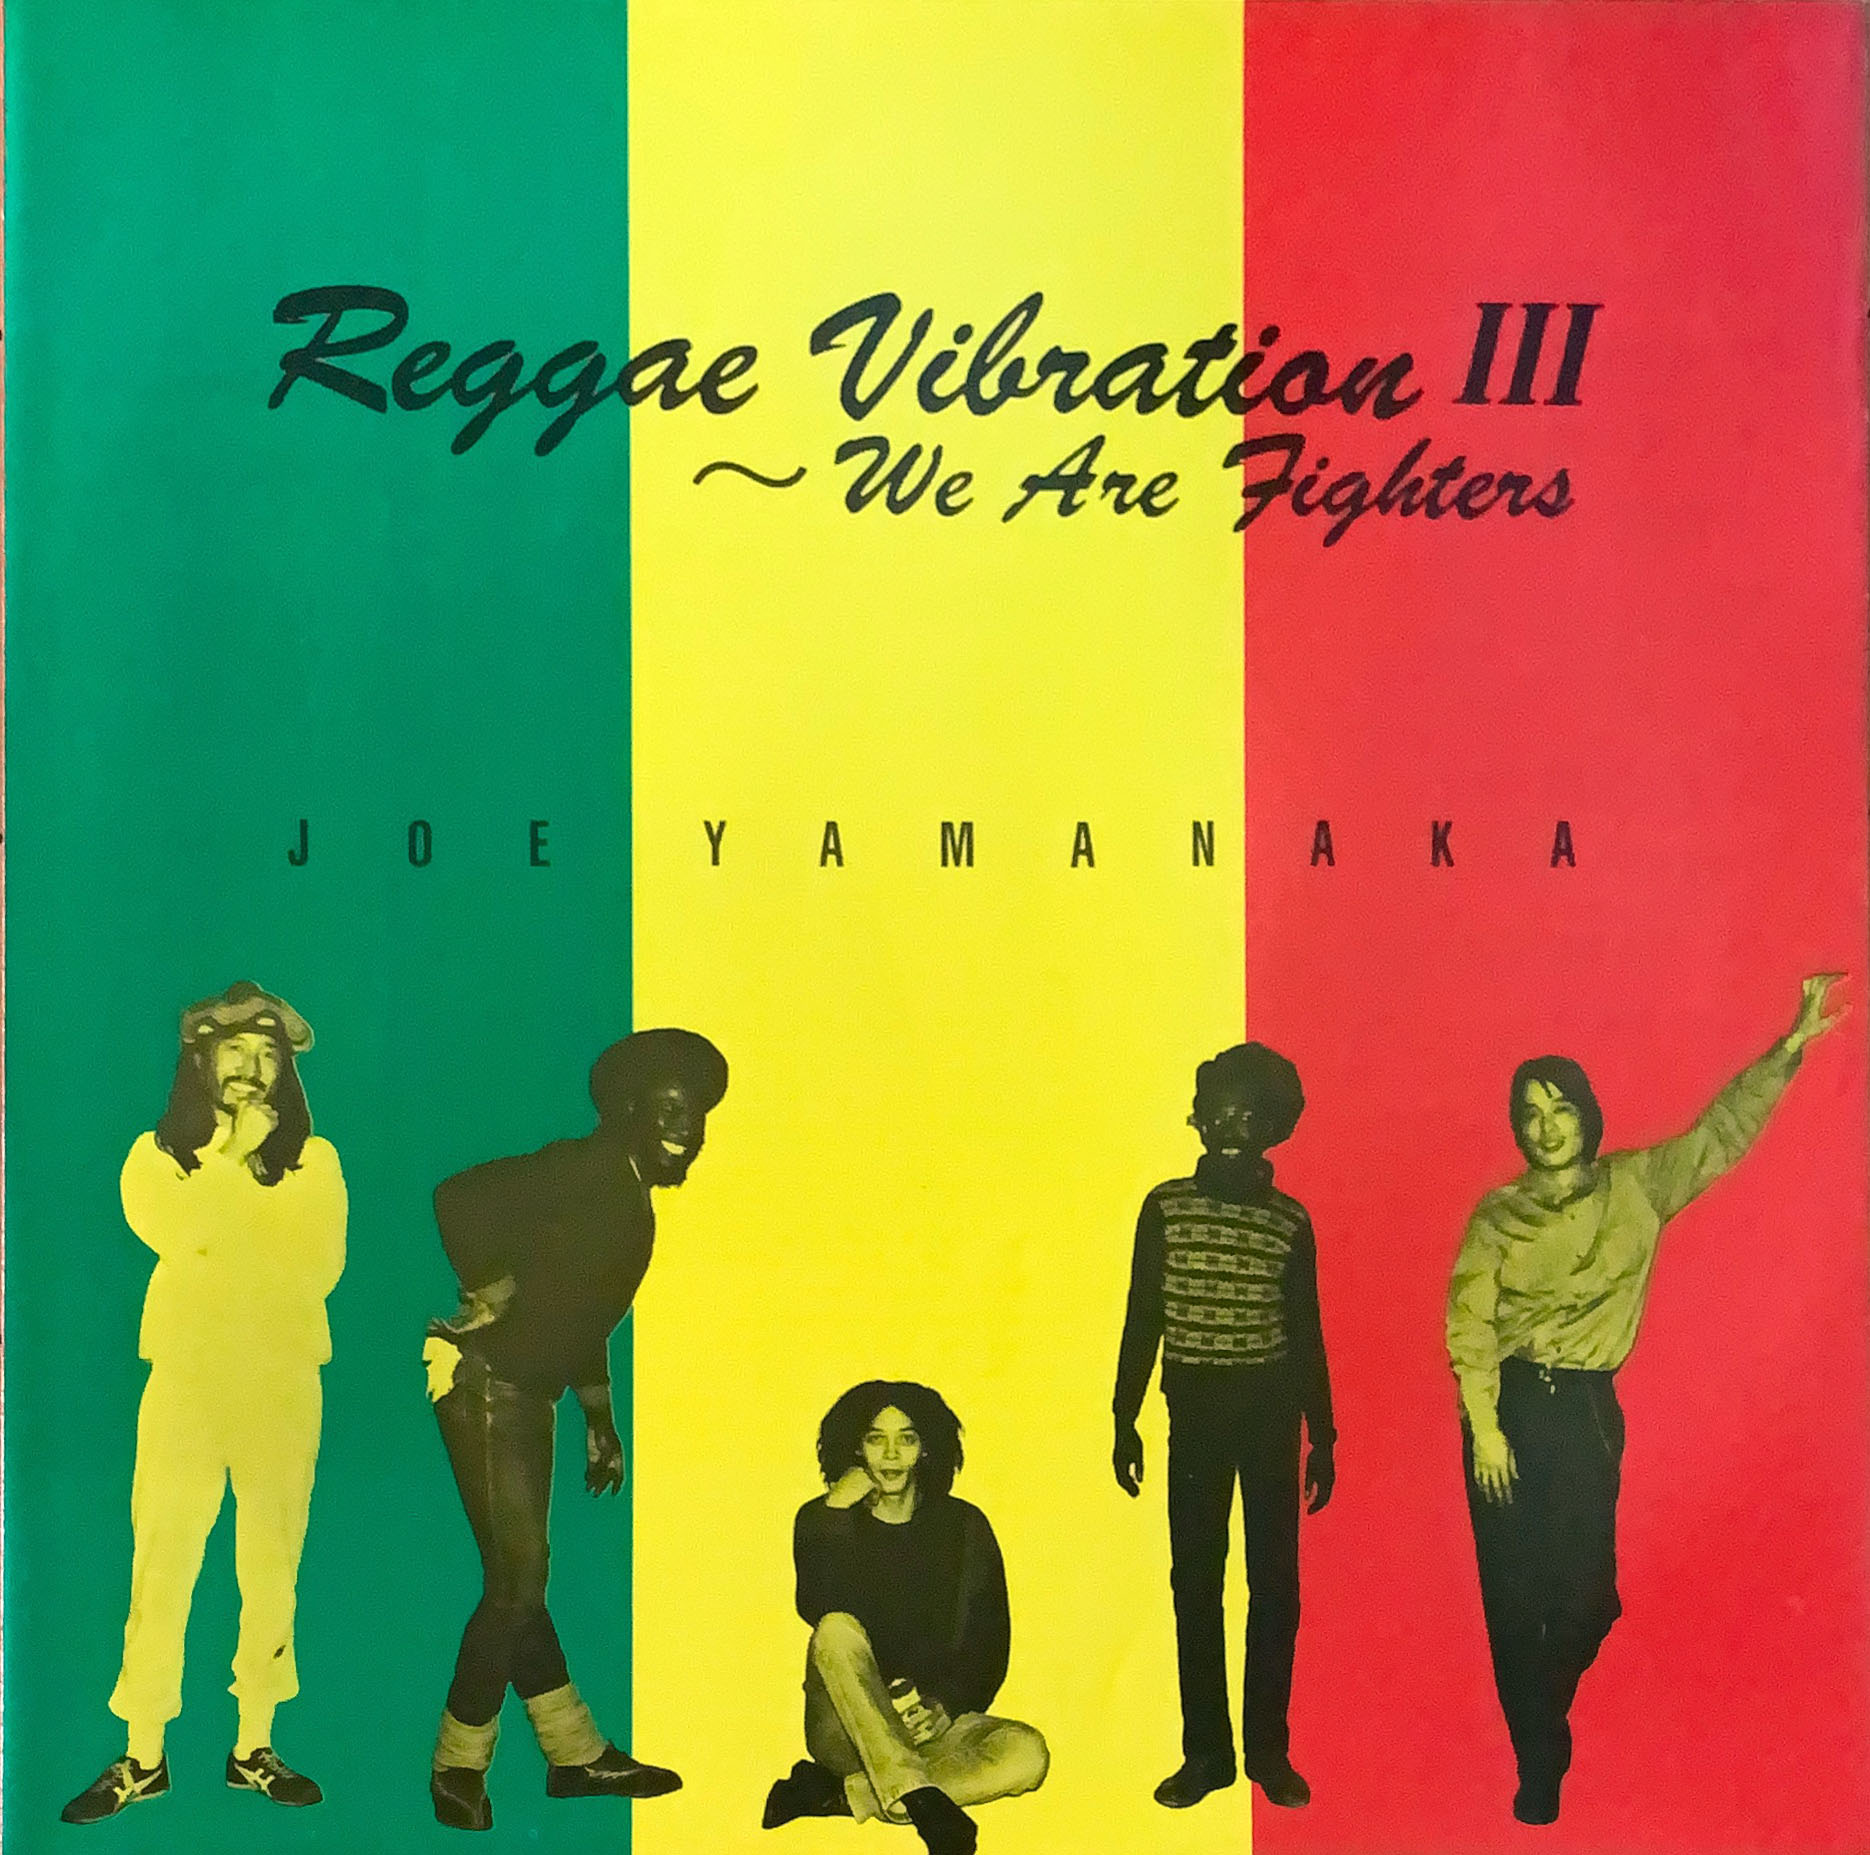 REGGAE VIBRATION III WE ARE FIGHTERS [LP] - bar chiba Music Store